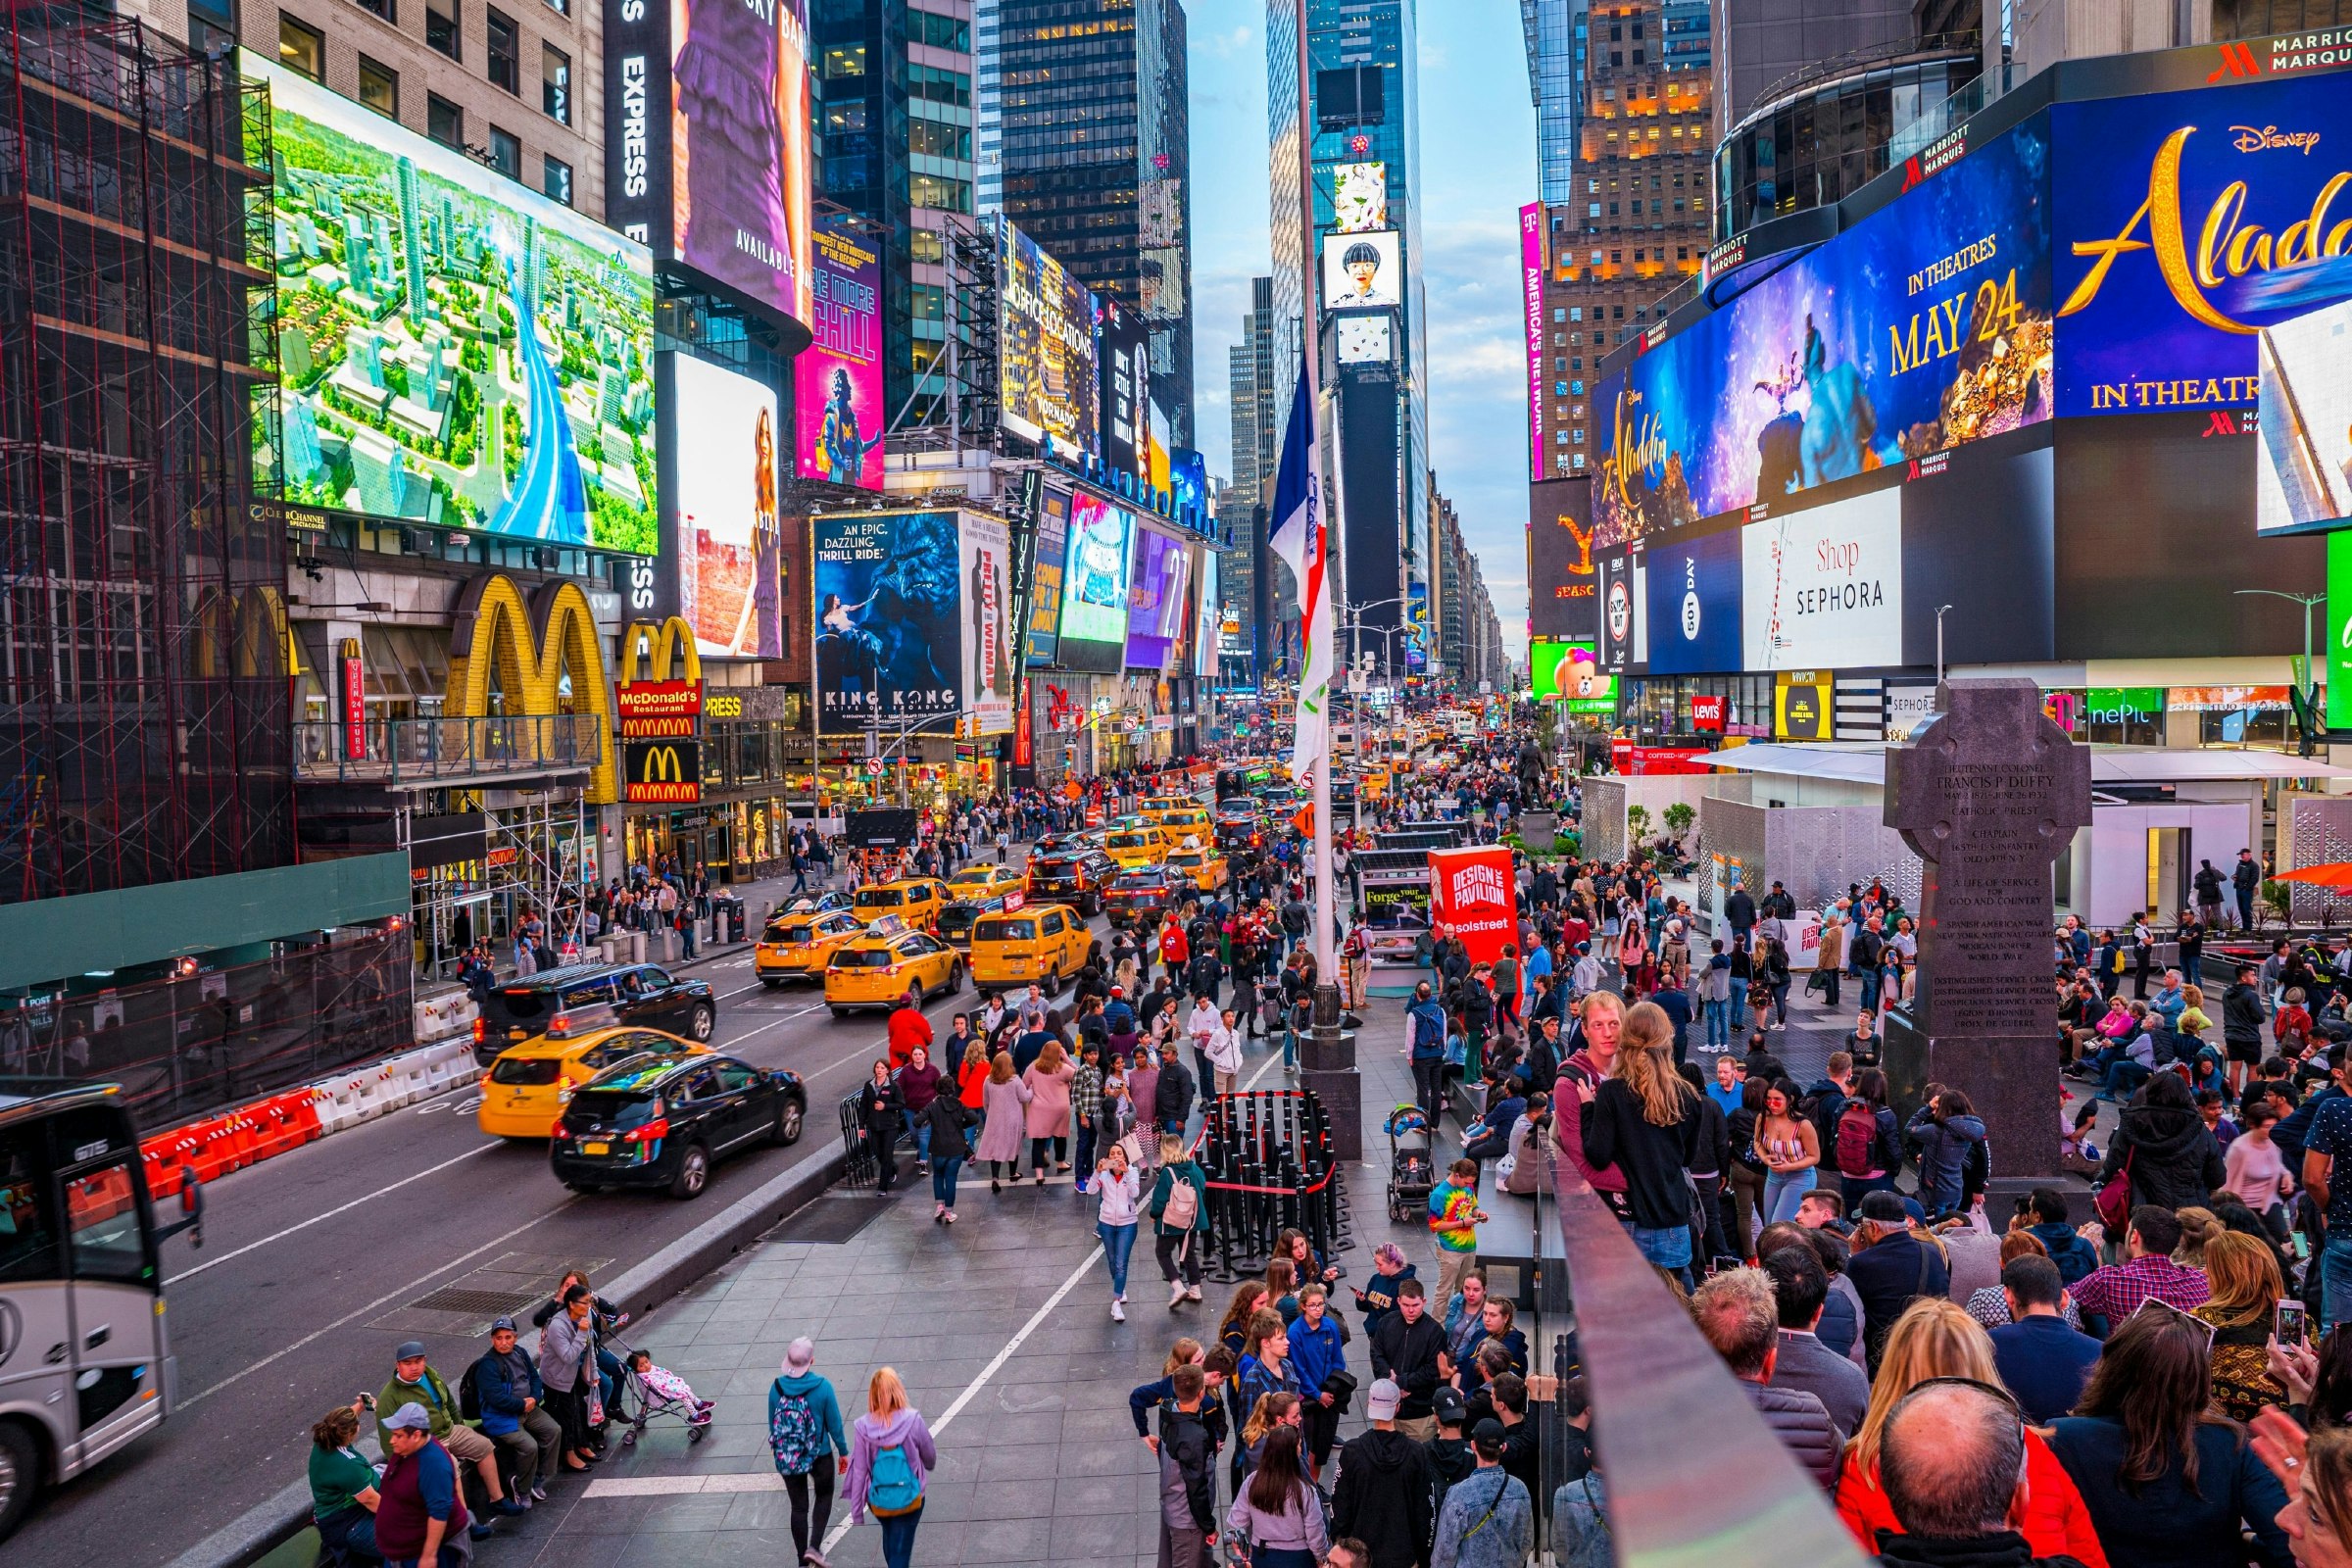 New York City’s Times Square, crowded in the early evening with pedestrians and traffic.